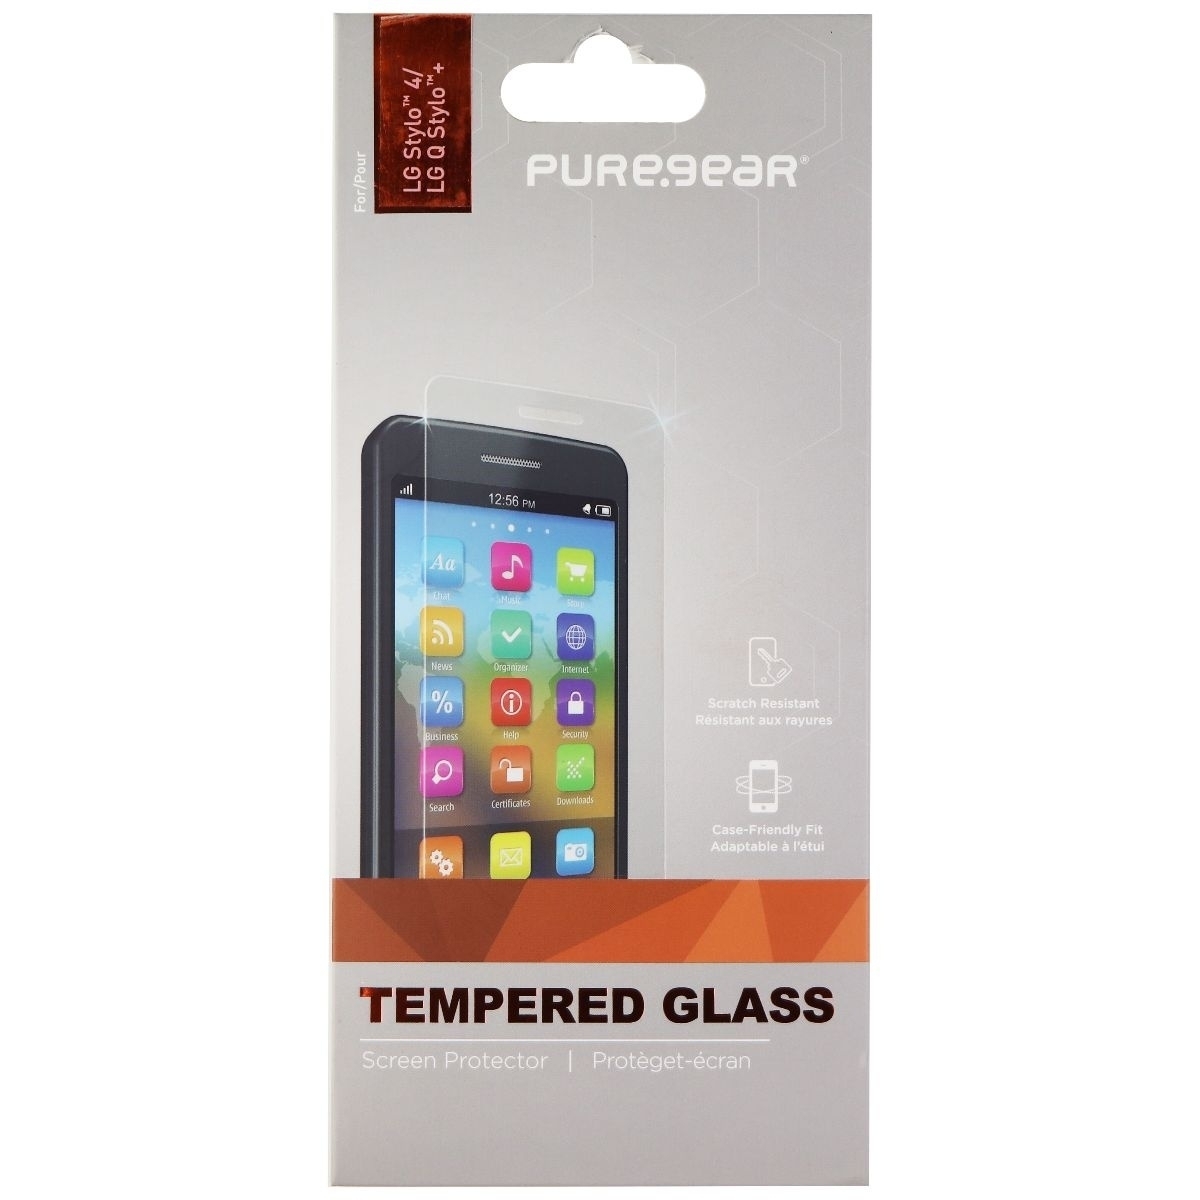 PureGear Tempered Glass Screen Protector For LG Stylo 4 / Q Stylo+ - Clear